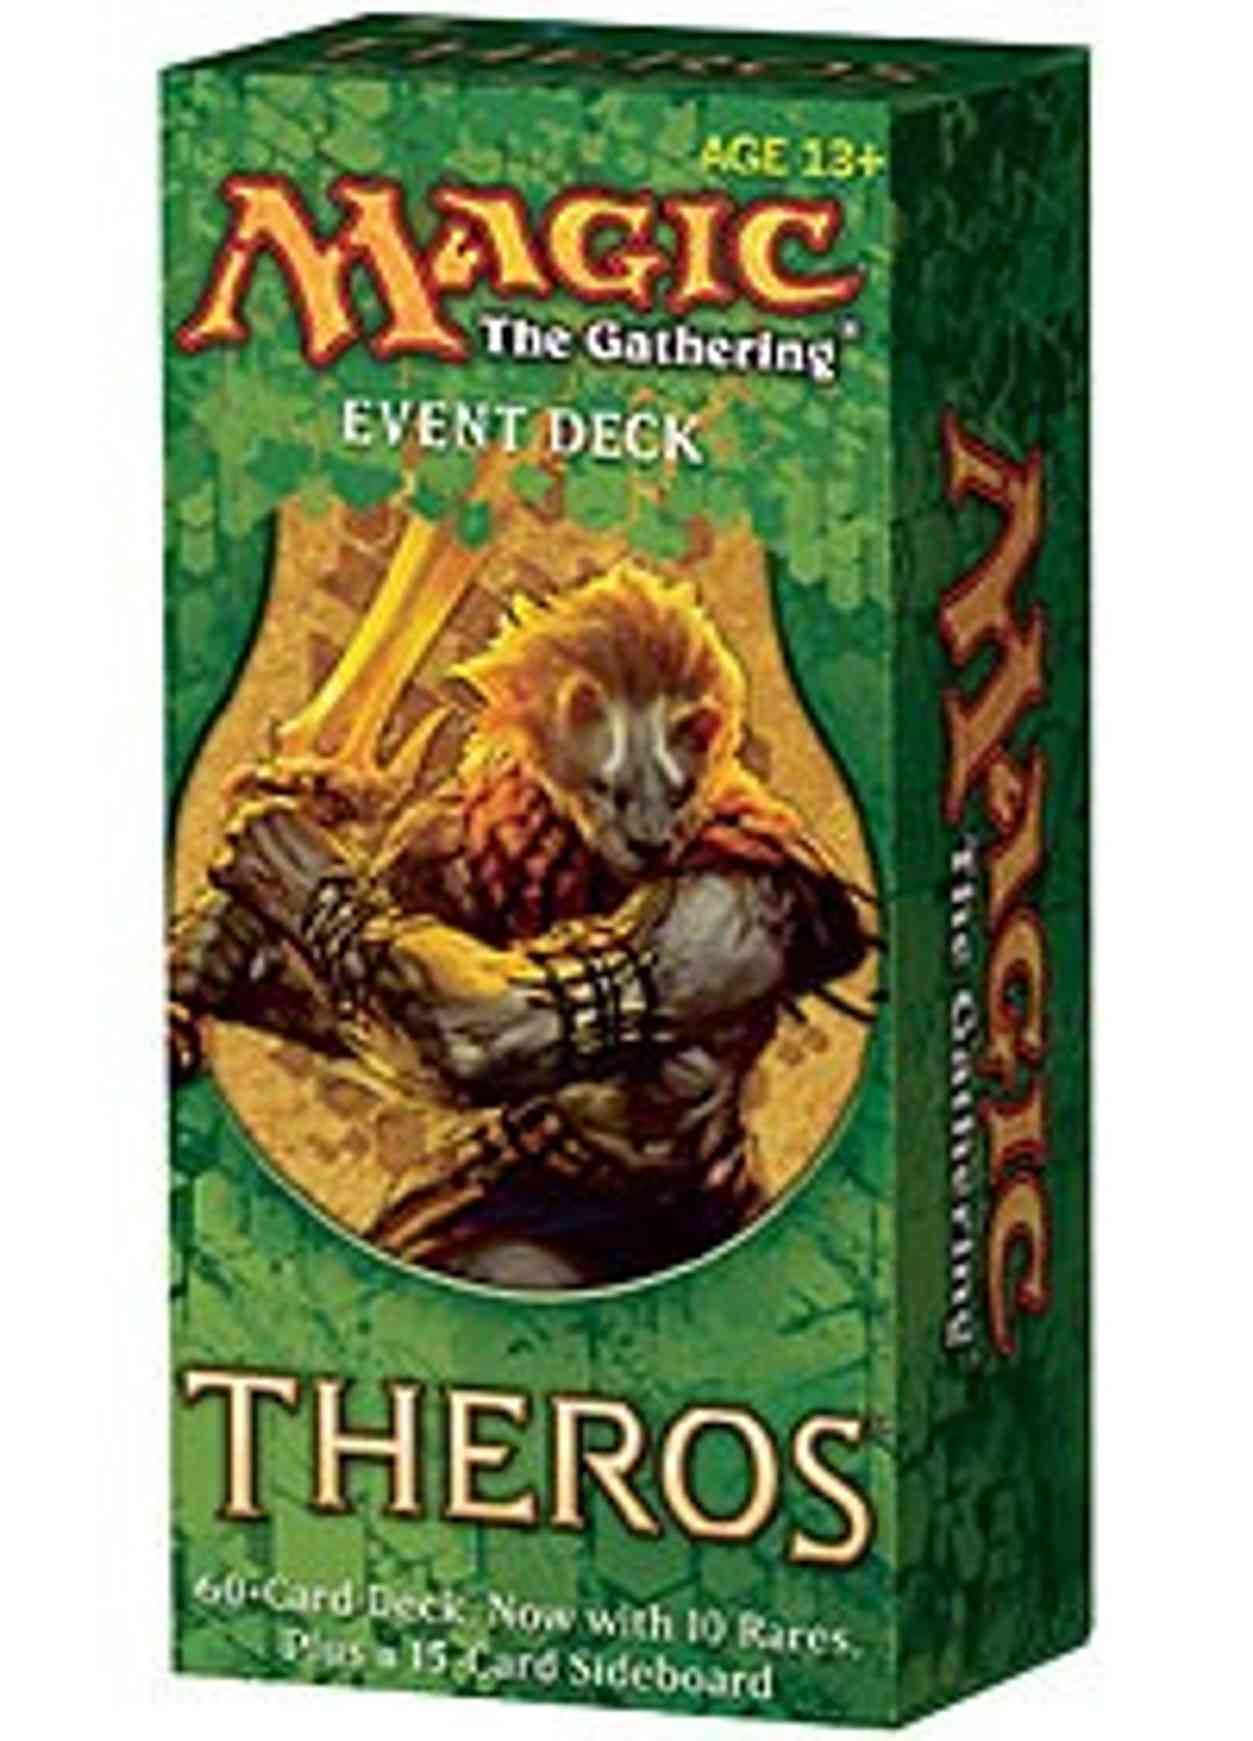 Theros - Event Deck magic card front